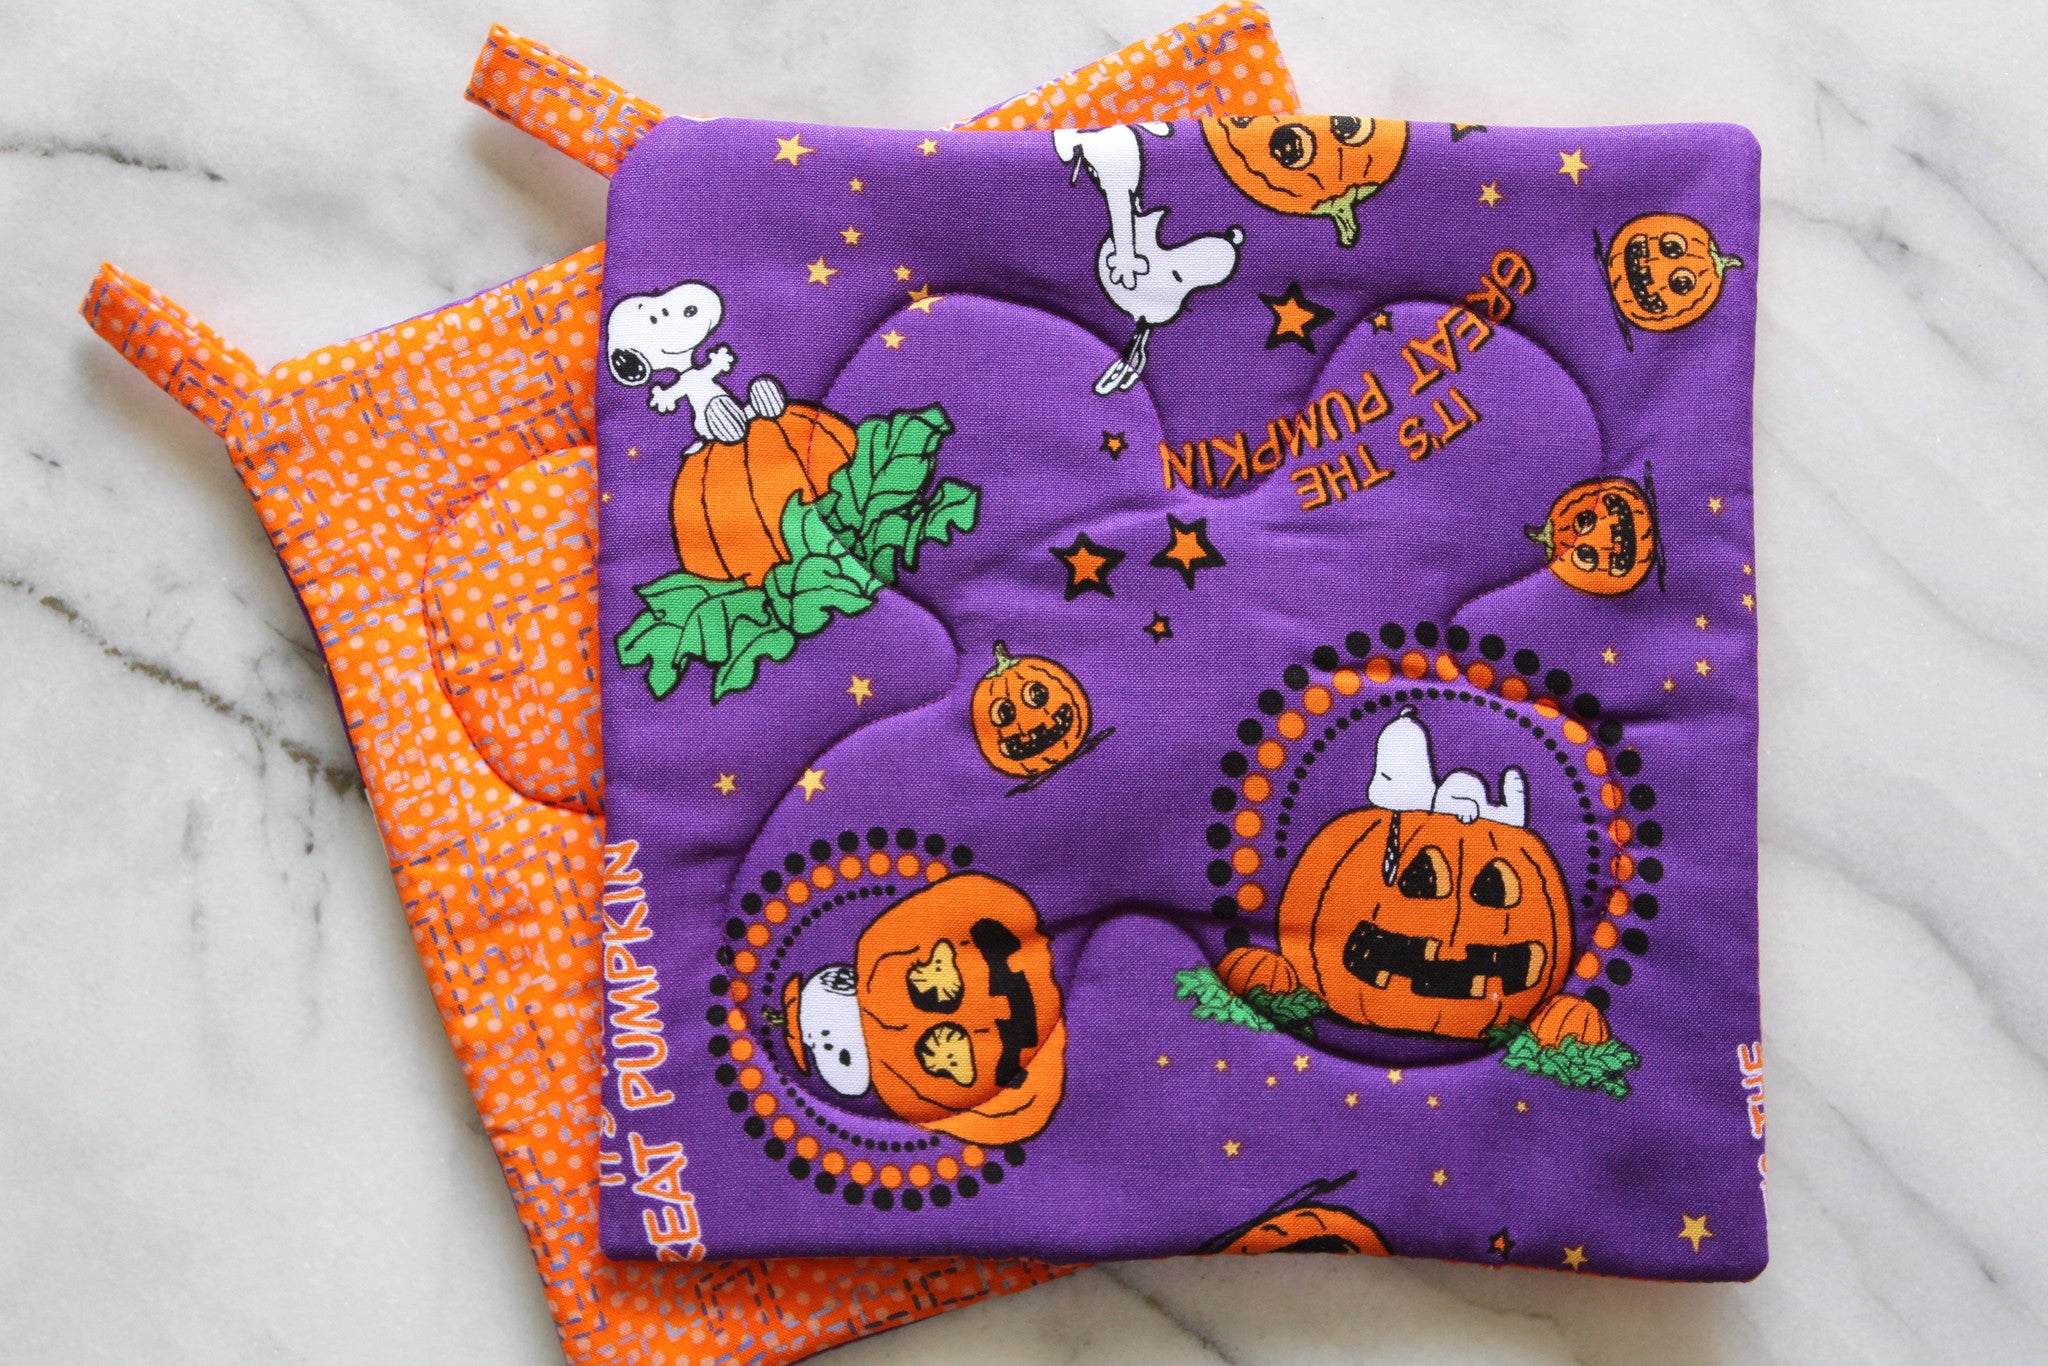 Snoopy and The Great Pumpkin Potholder-The Blue Peony-Animal_Dog,Category_Pot Holder,Color_Orange,Color_Purple,Department_Kitchen,Size_Traditional (Square),Theme_Fall,Theme_Halloween